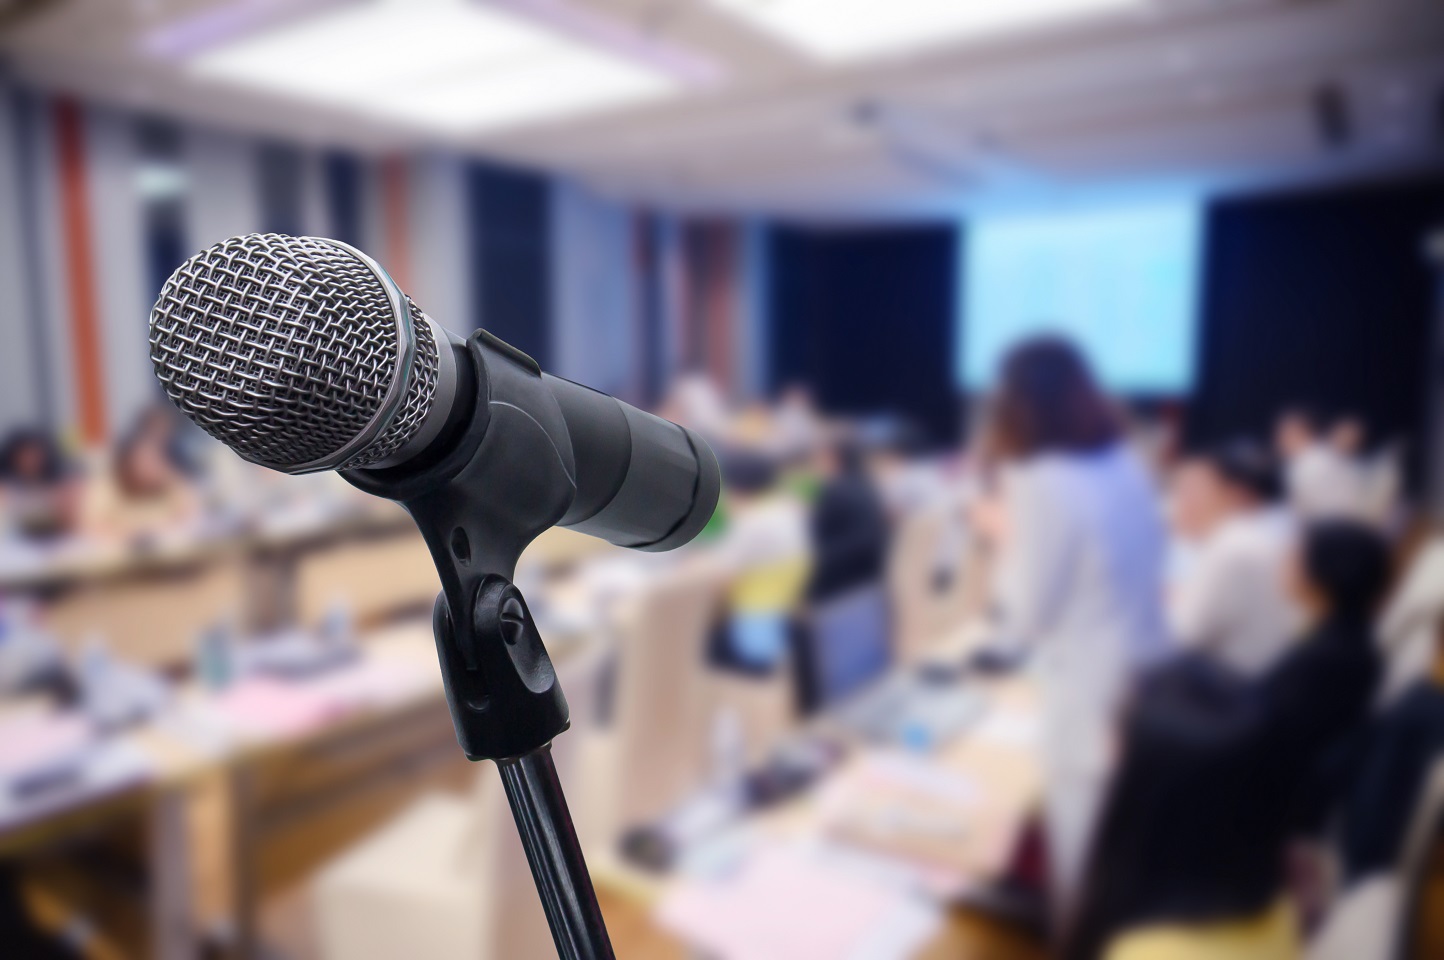 Microphone over the blurred business forum Meeting or Conference